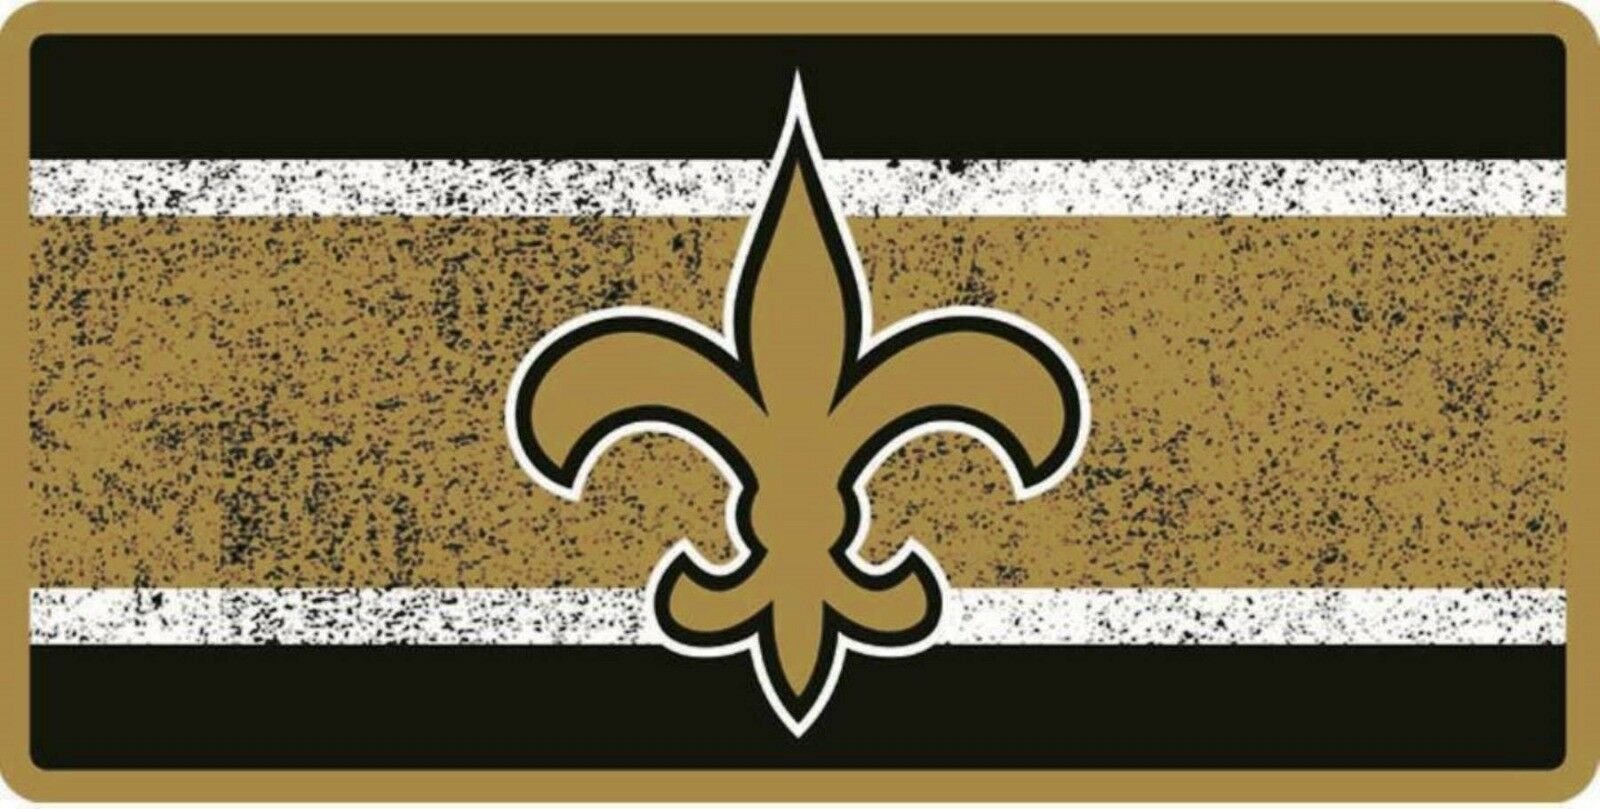 New Orleans Saints Premium Laser Cut Tag License Plate, Vintage Style, Mirrored Inlaid Acrylic, 12x6 Inch